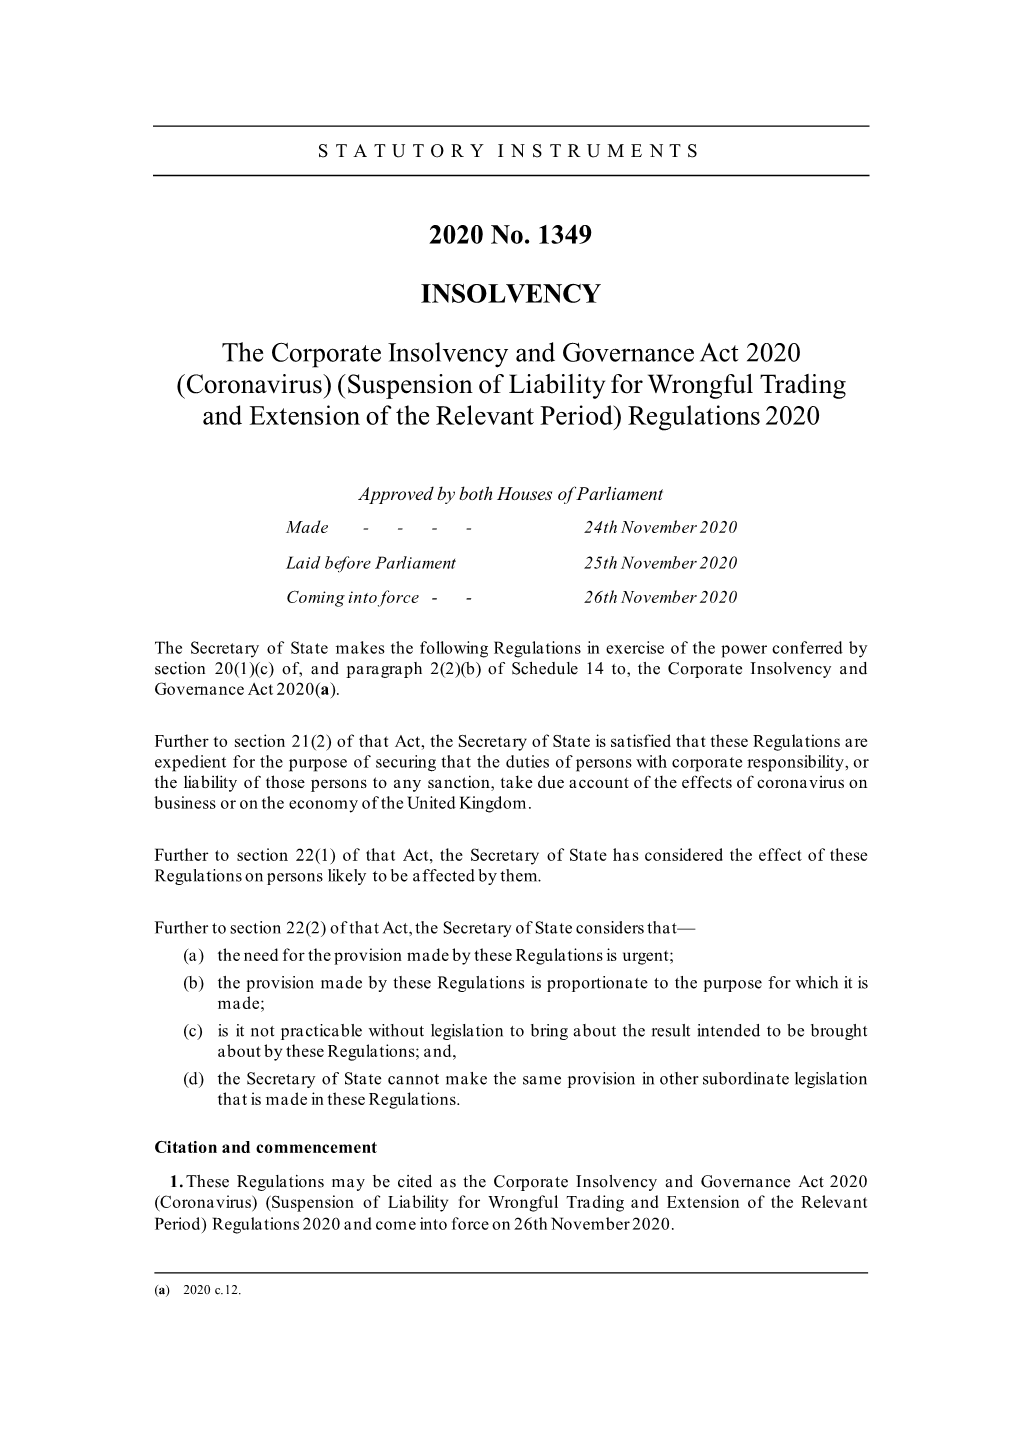 Corporate Insolvency and Governance Act 2020 (Coronavirus) (Suspension of Liability for Wrongful Trading and Extension of the Relevant Period) Regulations 2020